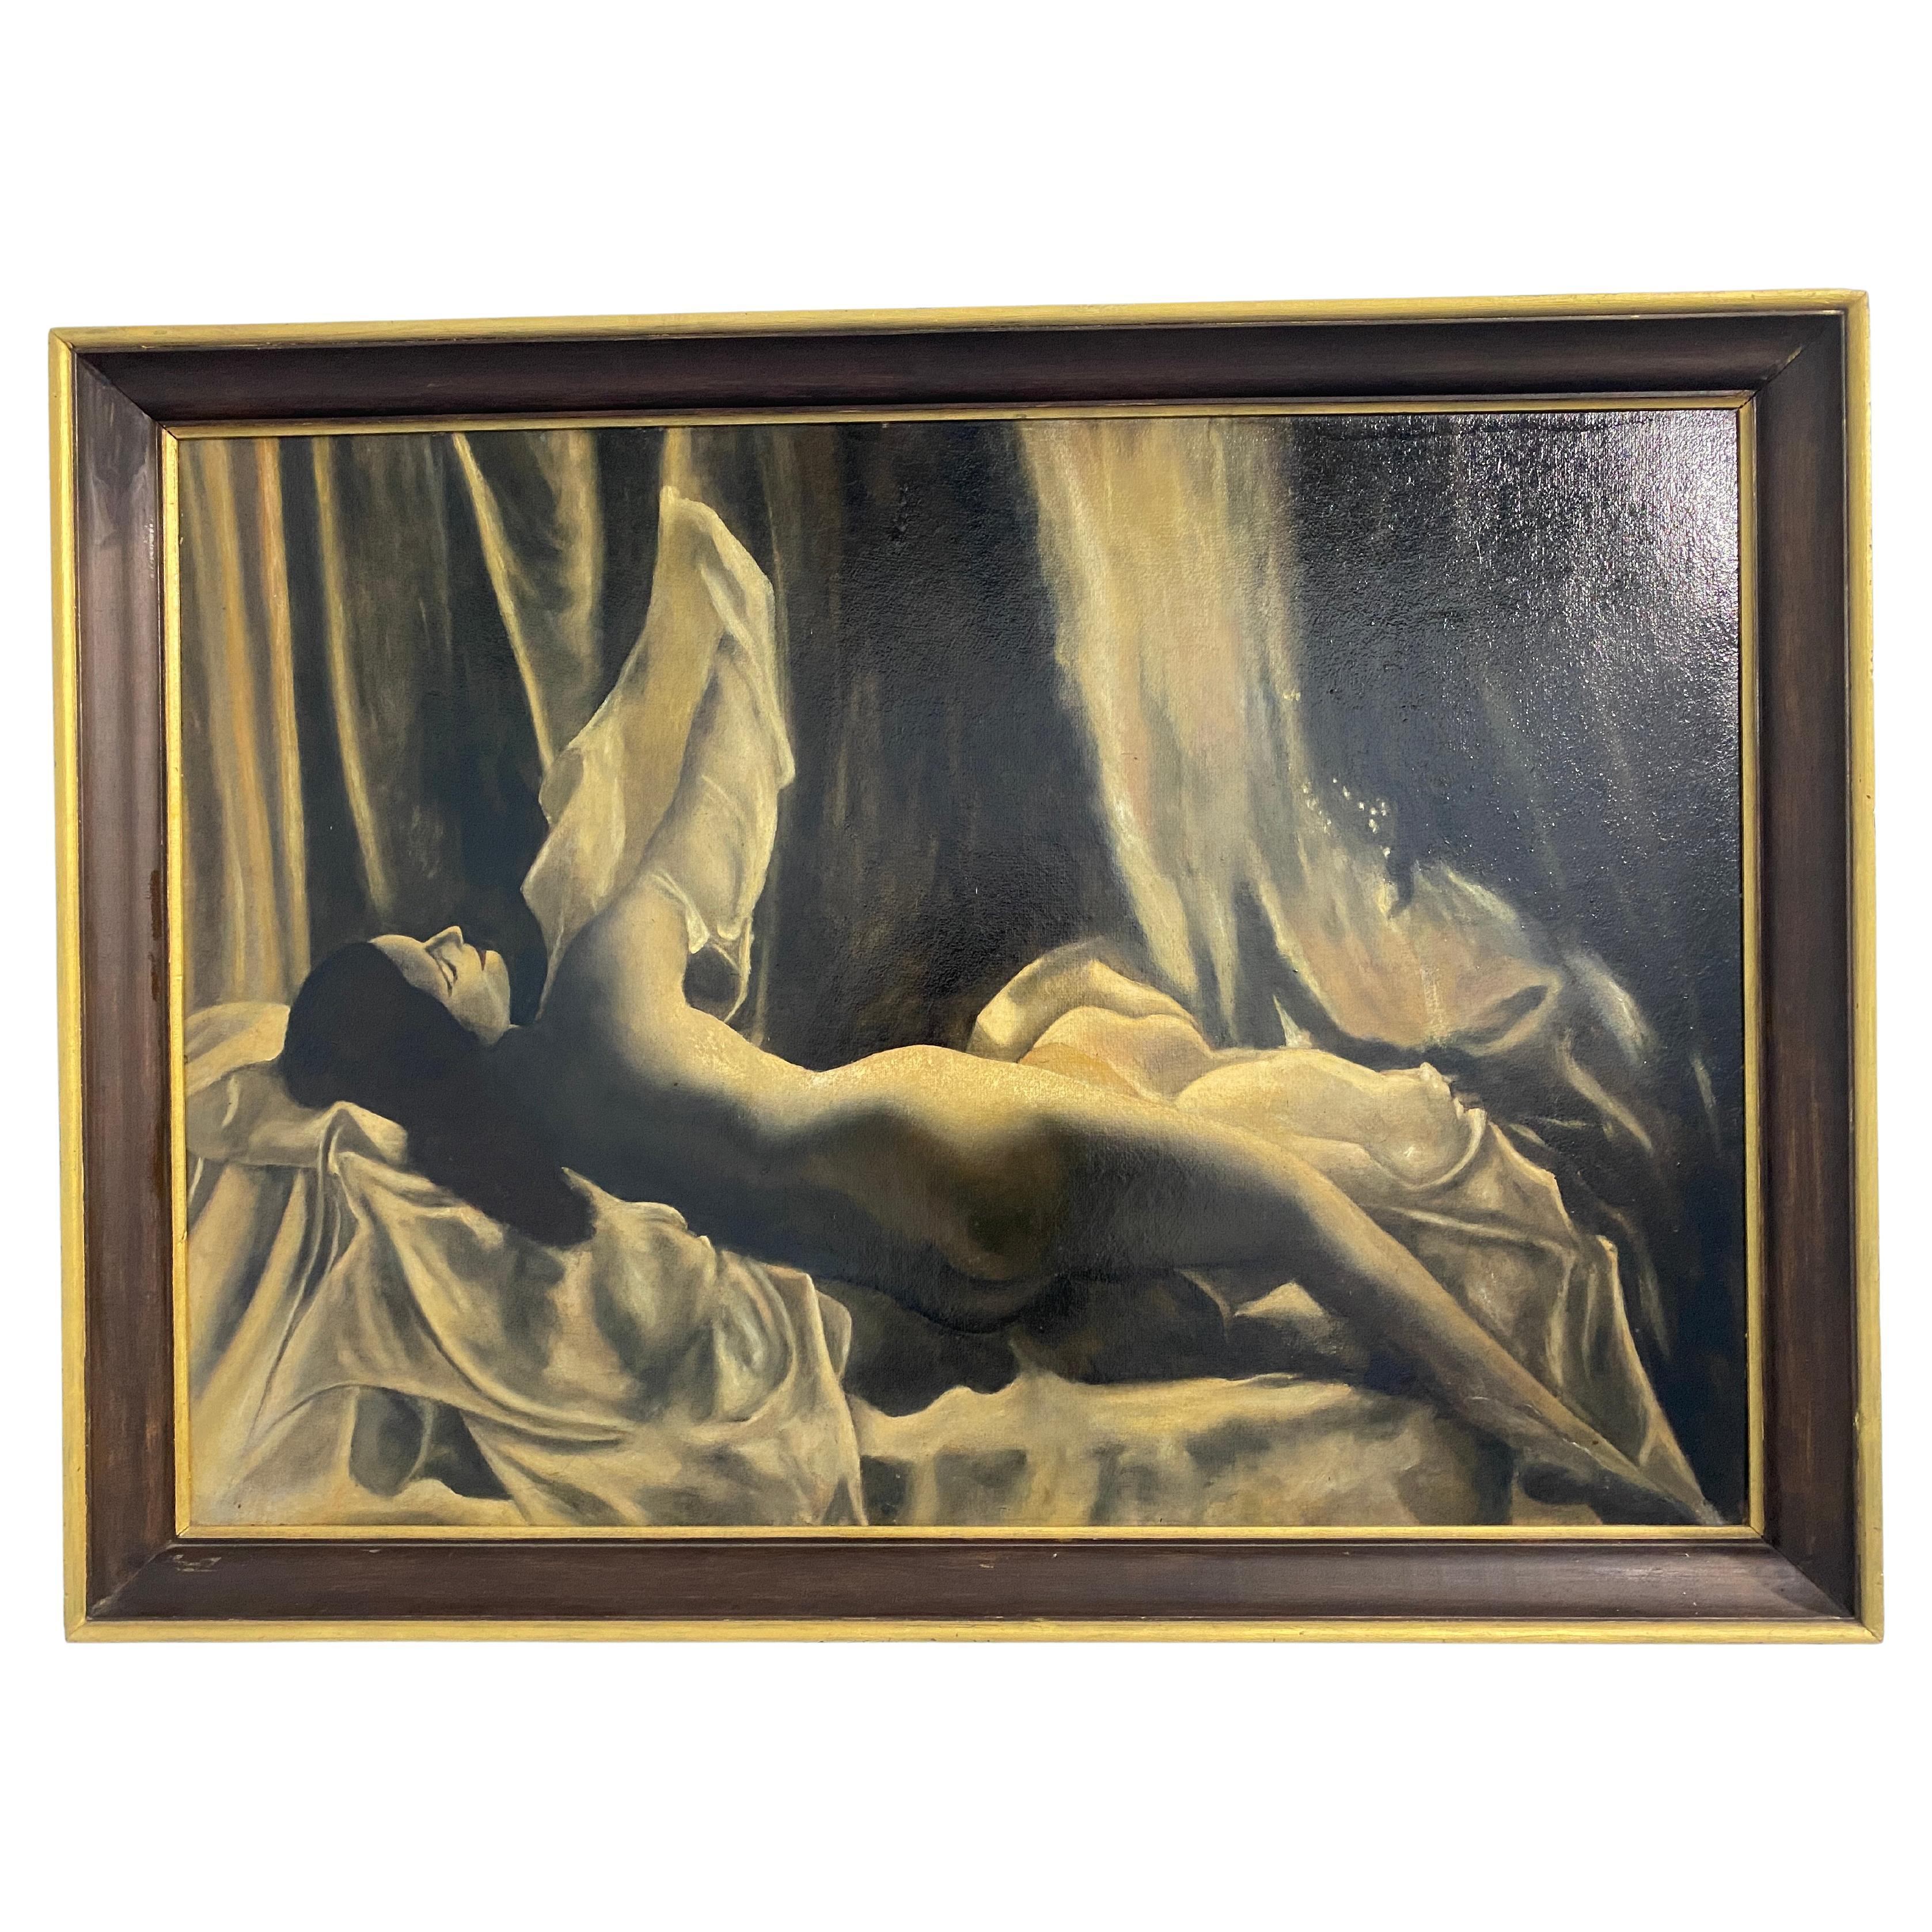 Antique French Art Deco oil painting "Female Nude" signed Chavarot For Sale